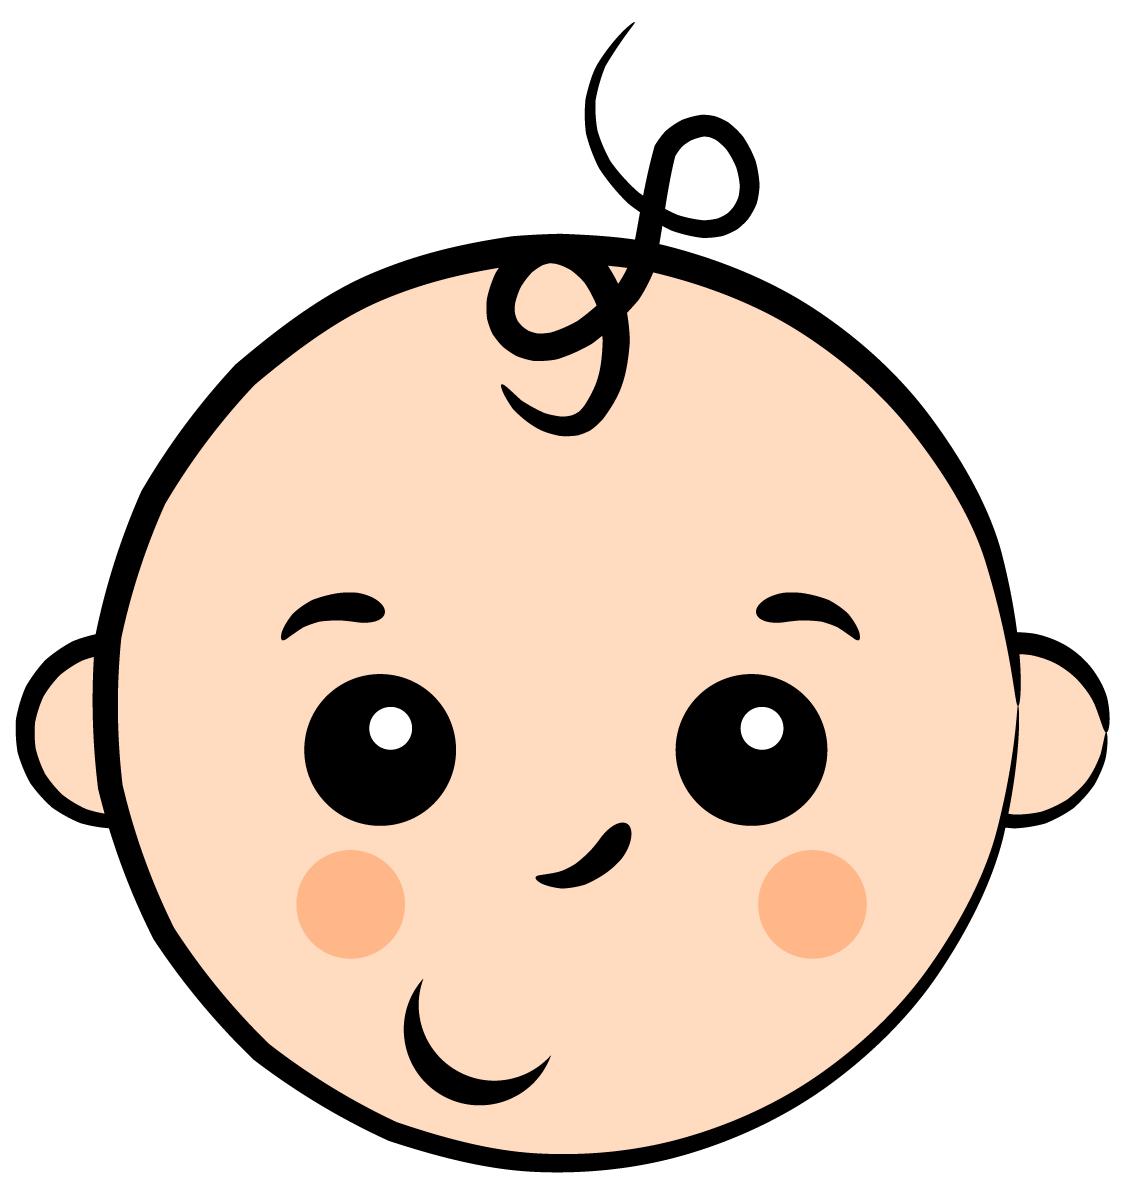 3 baby face clipart clipart images gallery for free download.